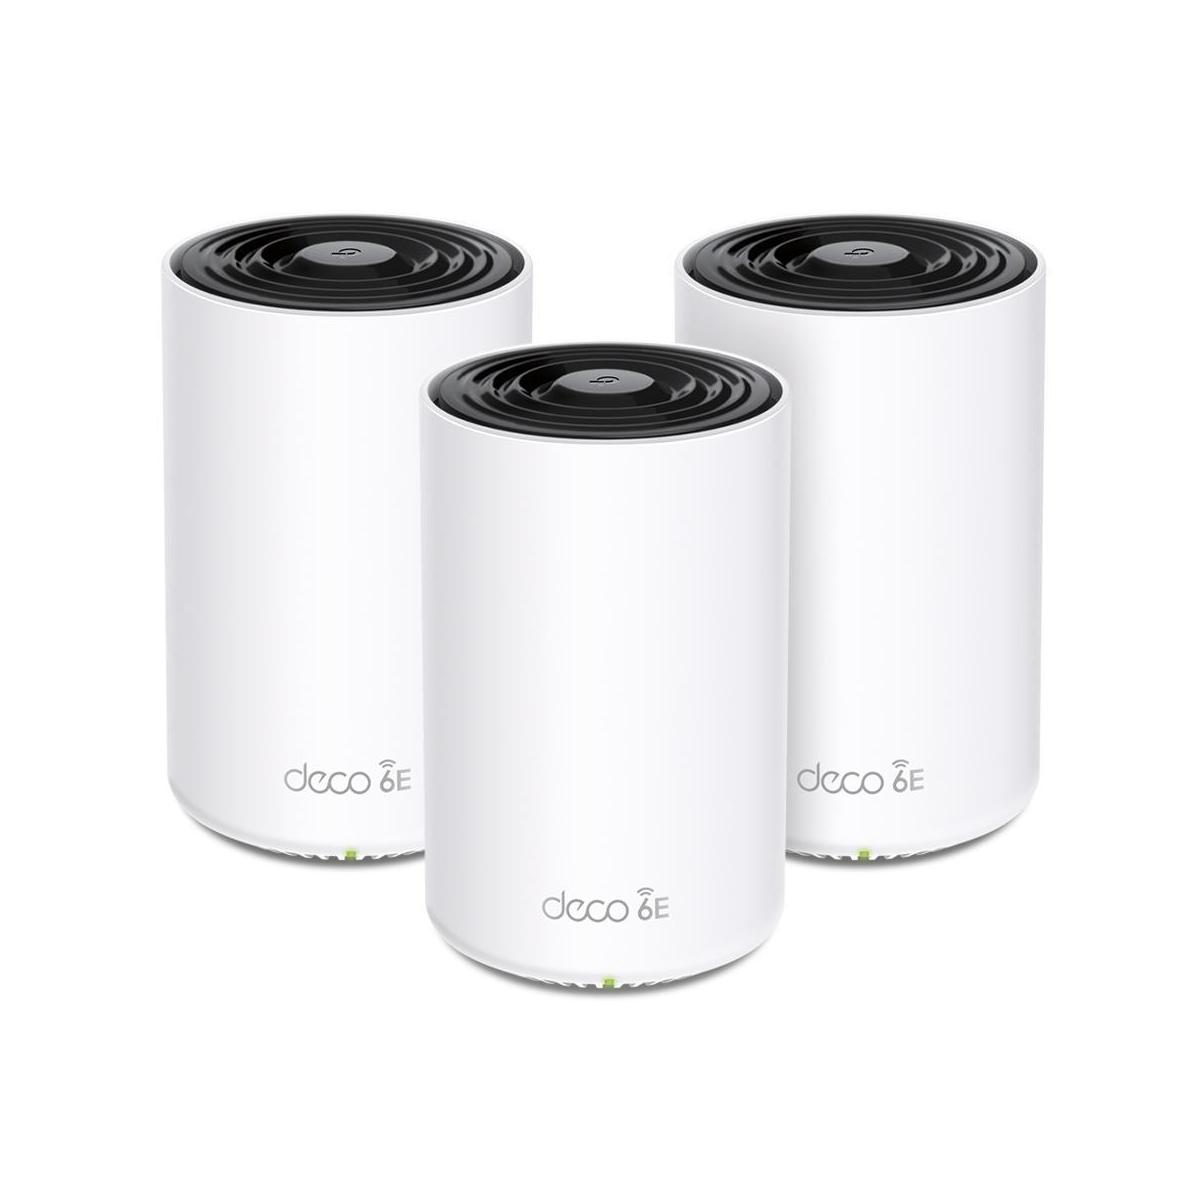 Access XE75(3-PACK) Point TP-LINK DECO